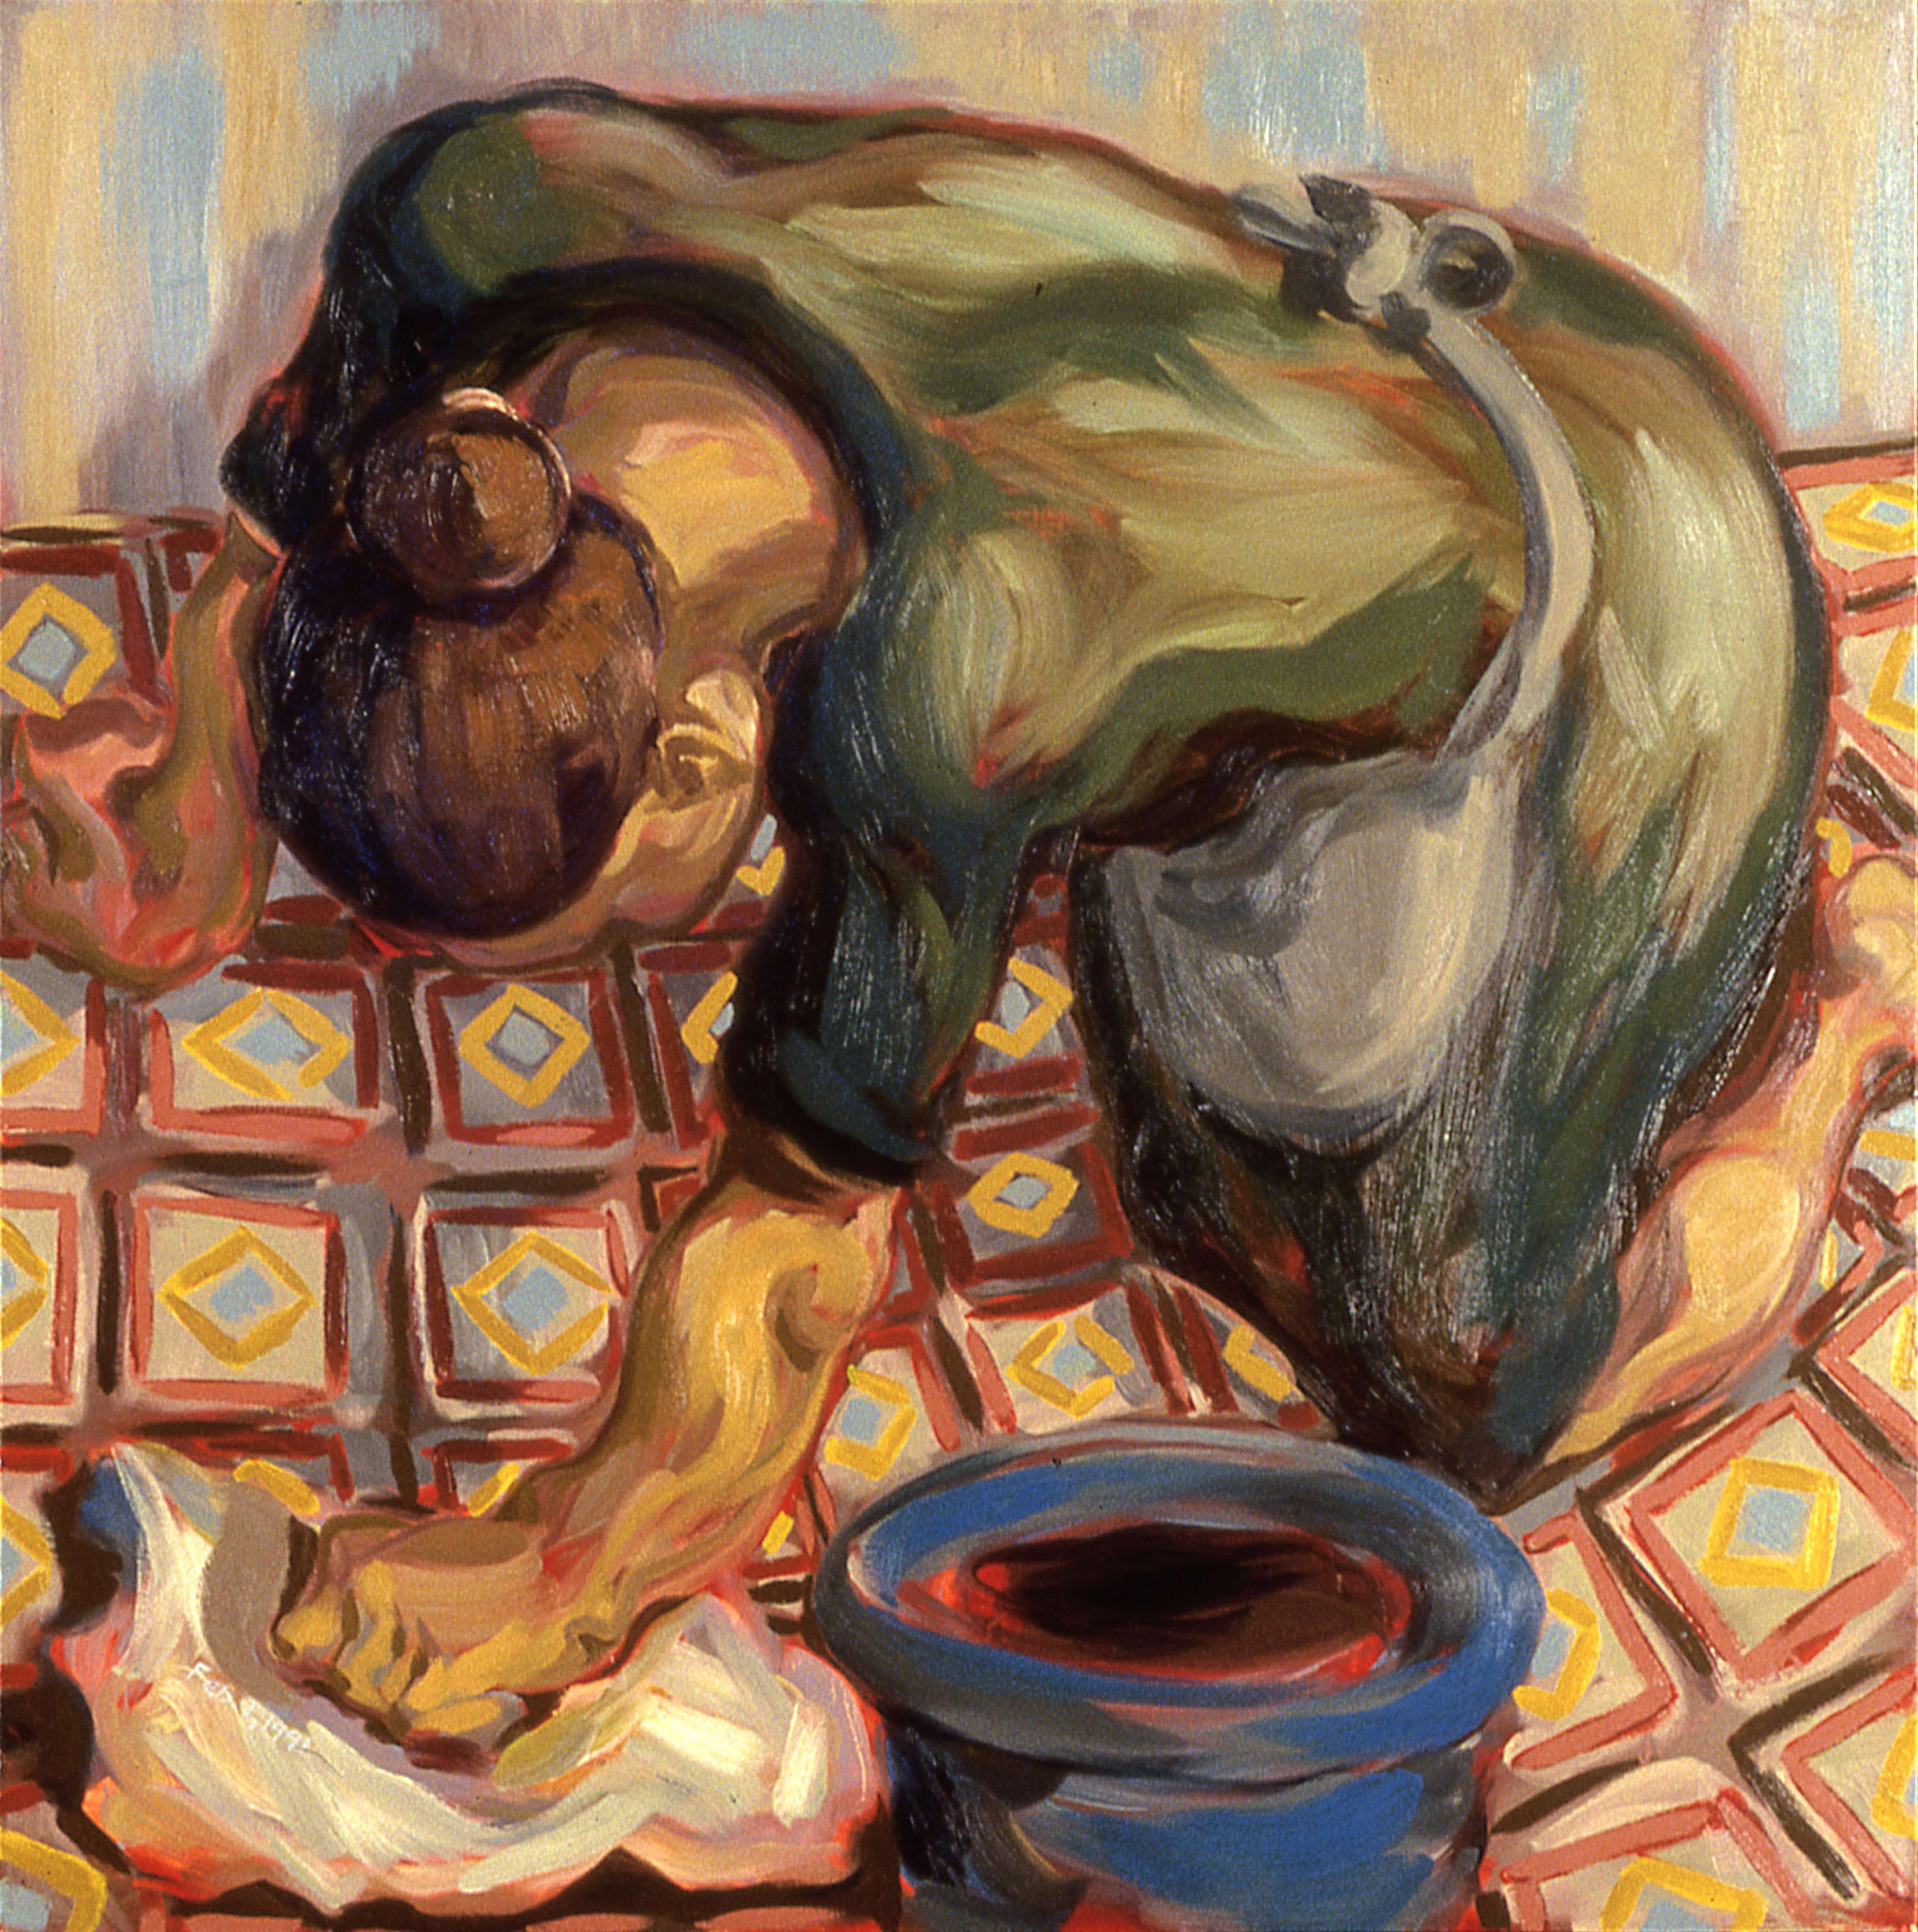 WORK IS THE CONDITION FOR EQUALITY #2, painted by Vince Mancuso in 1991, oil on canvas 4x5 feet